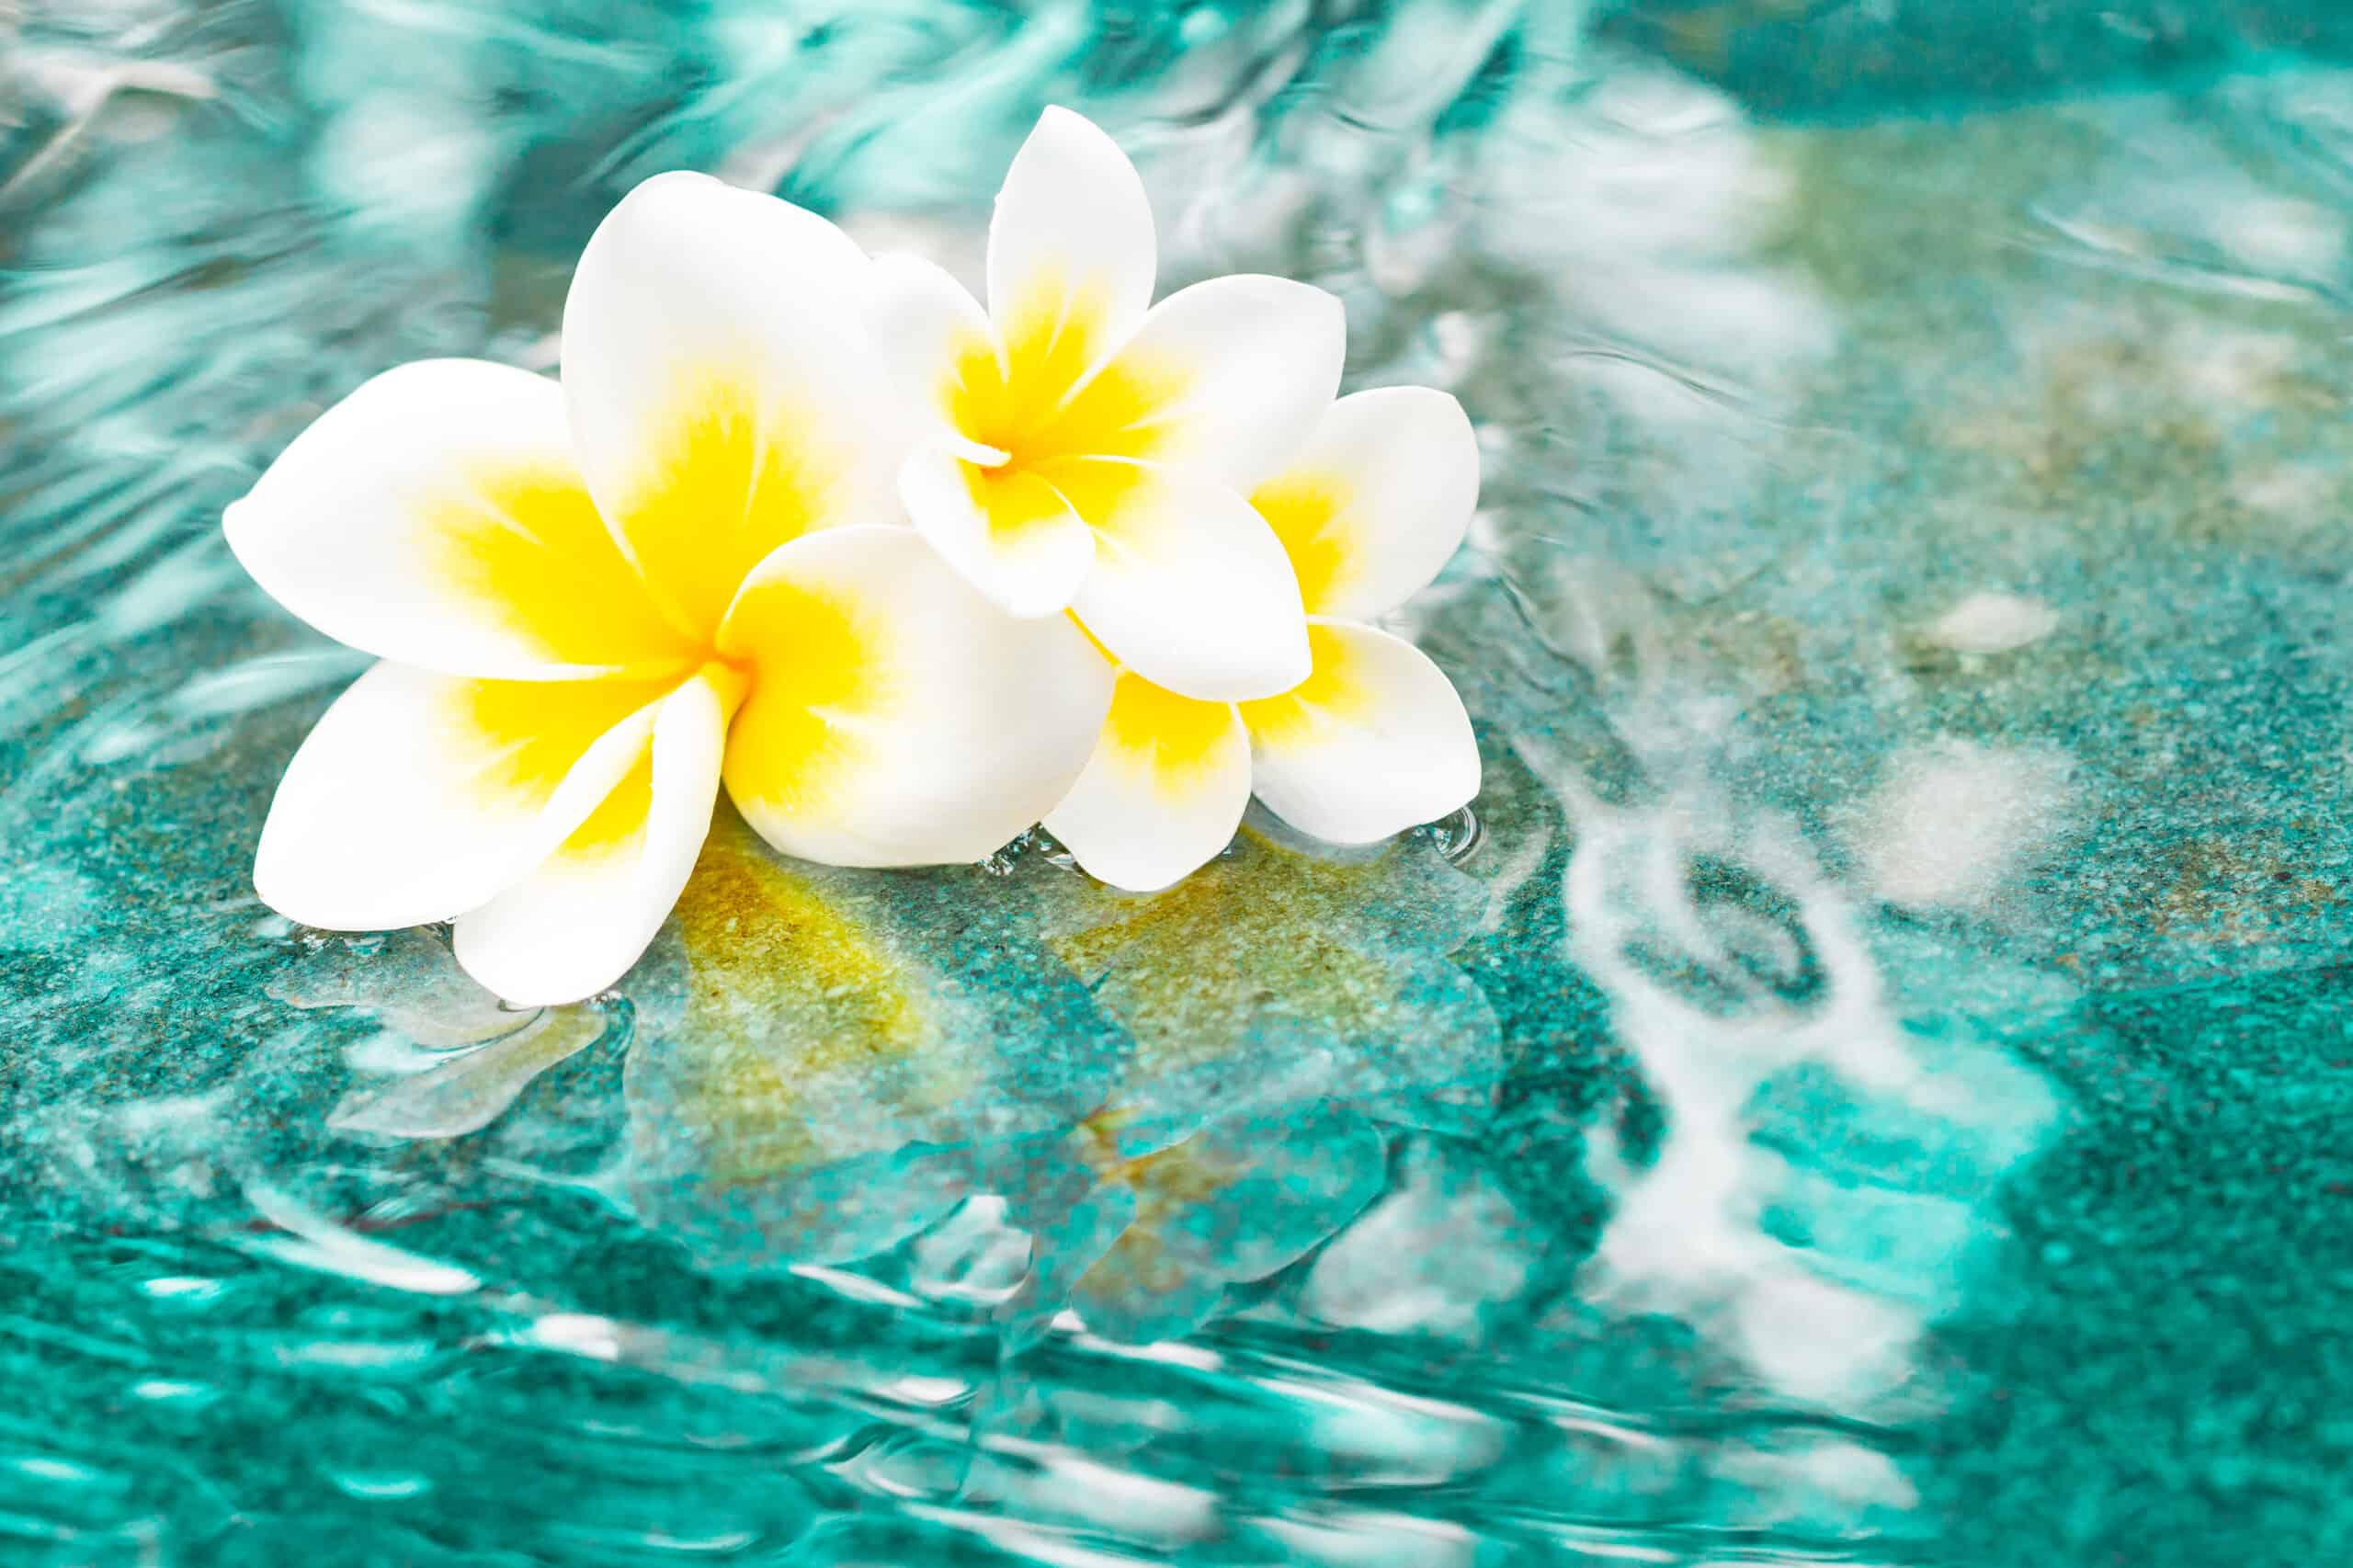 Flowers of plumeria in the turquoise water surface.